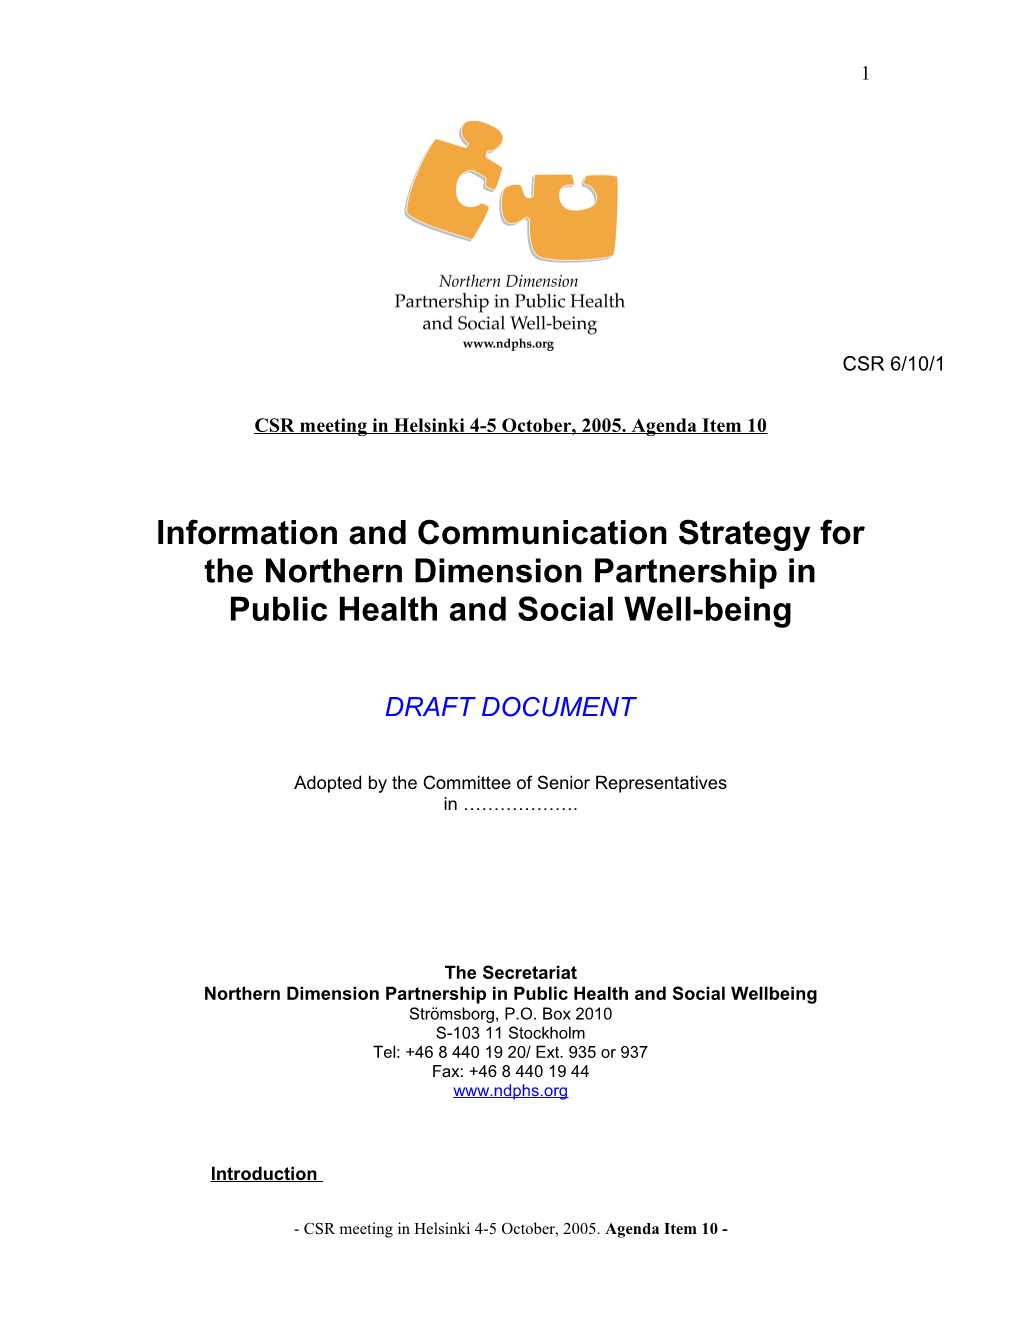 Information and Communication Strategy